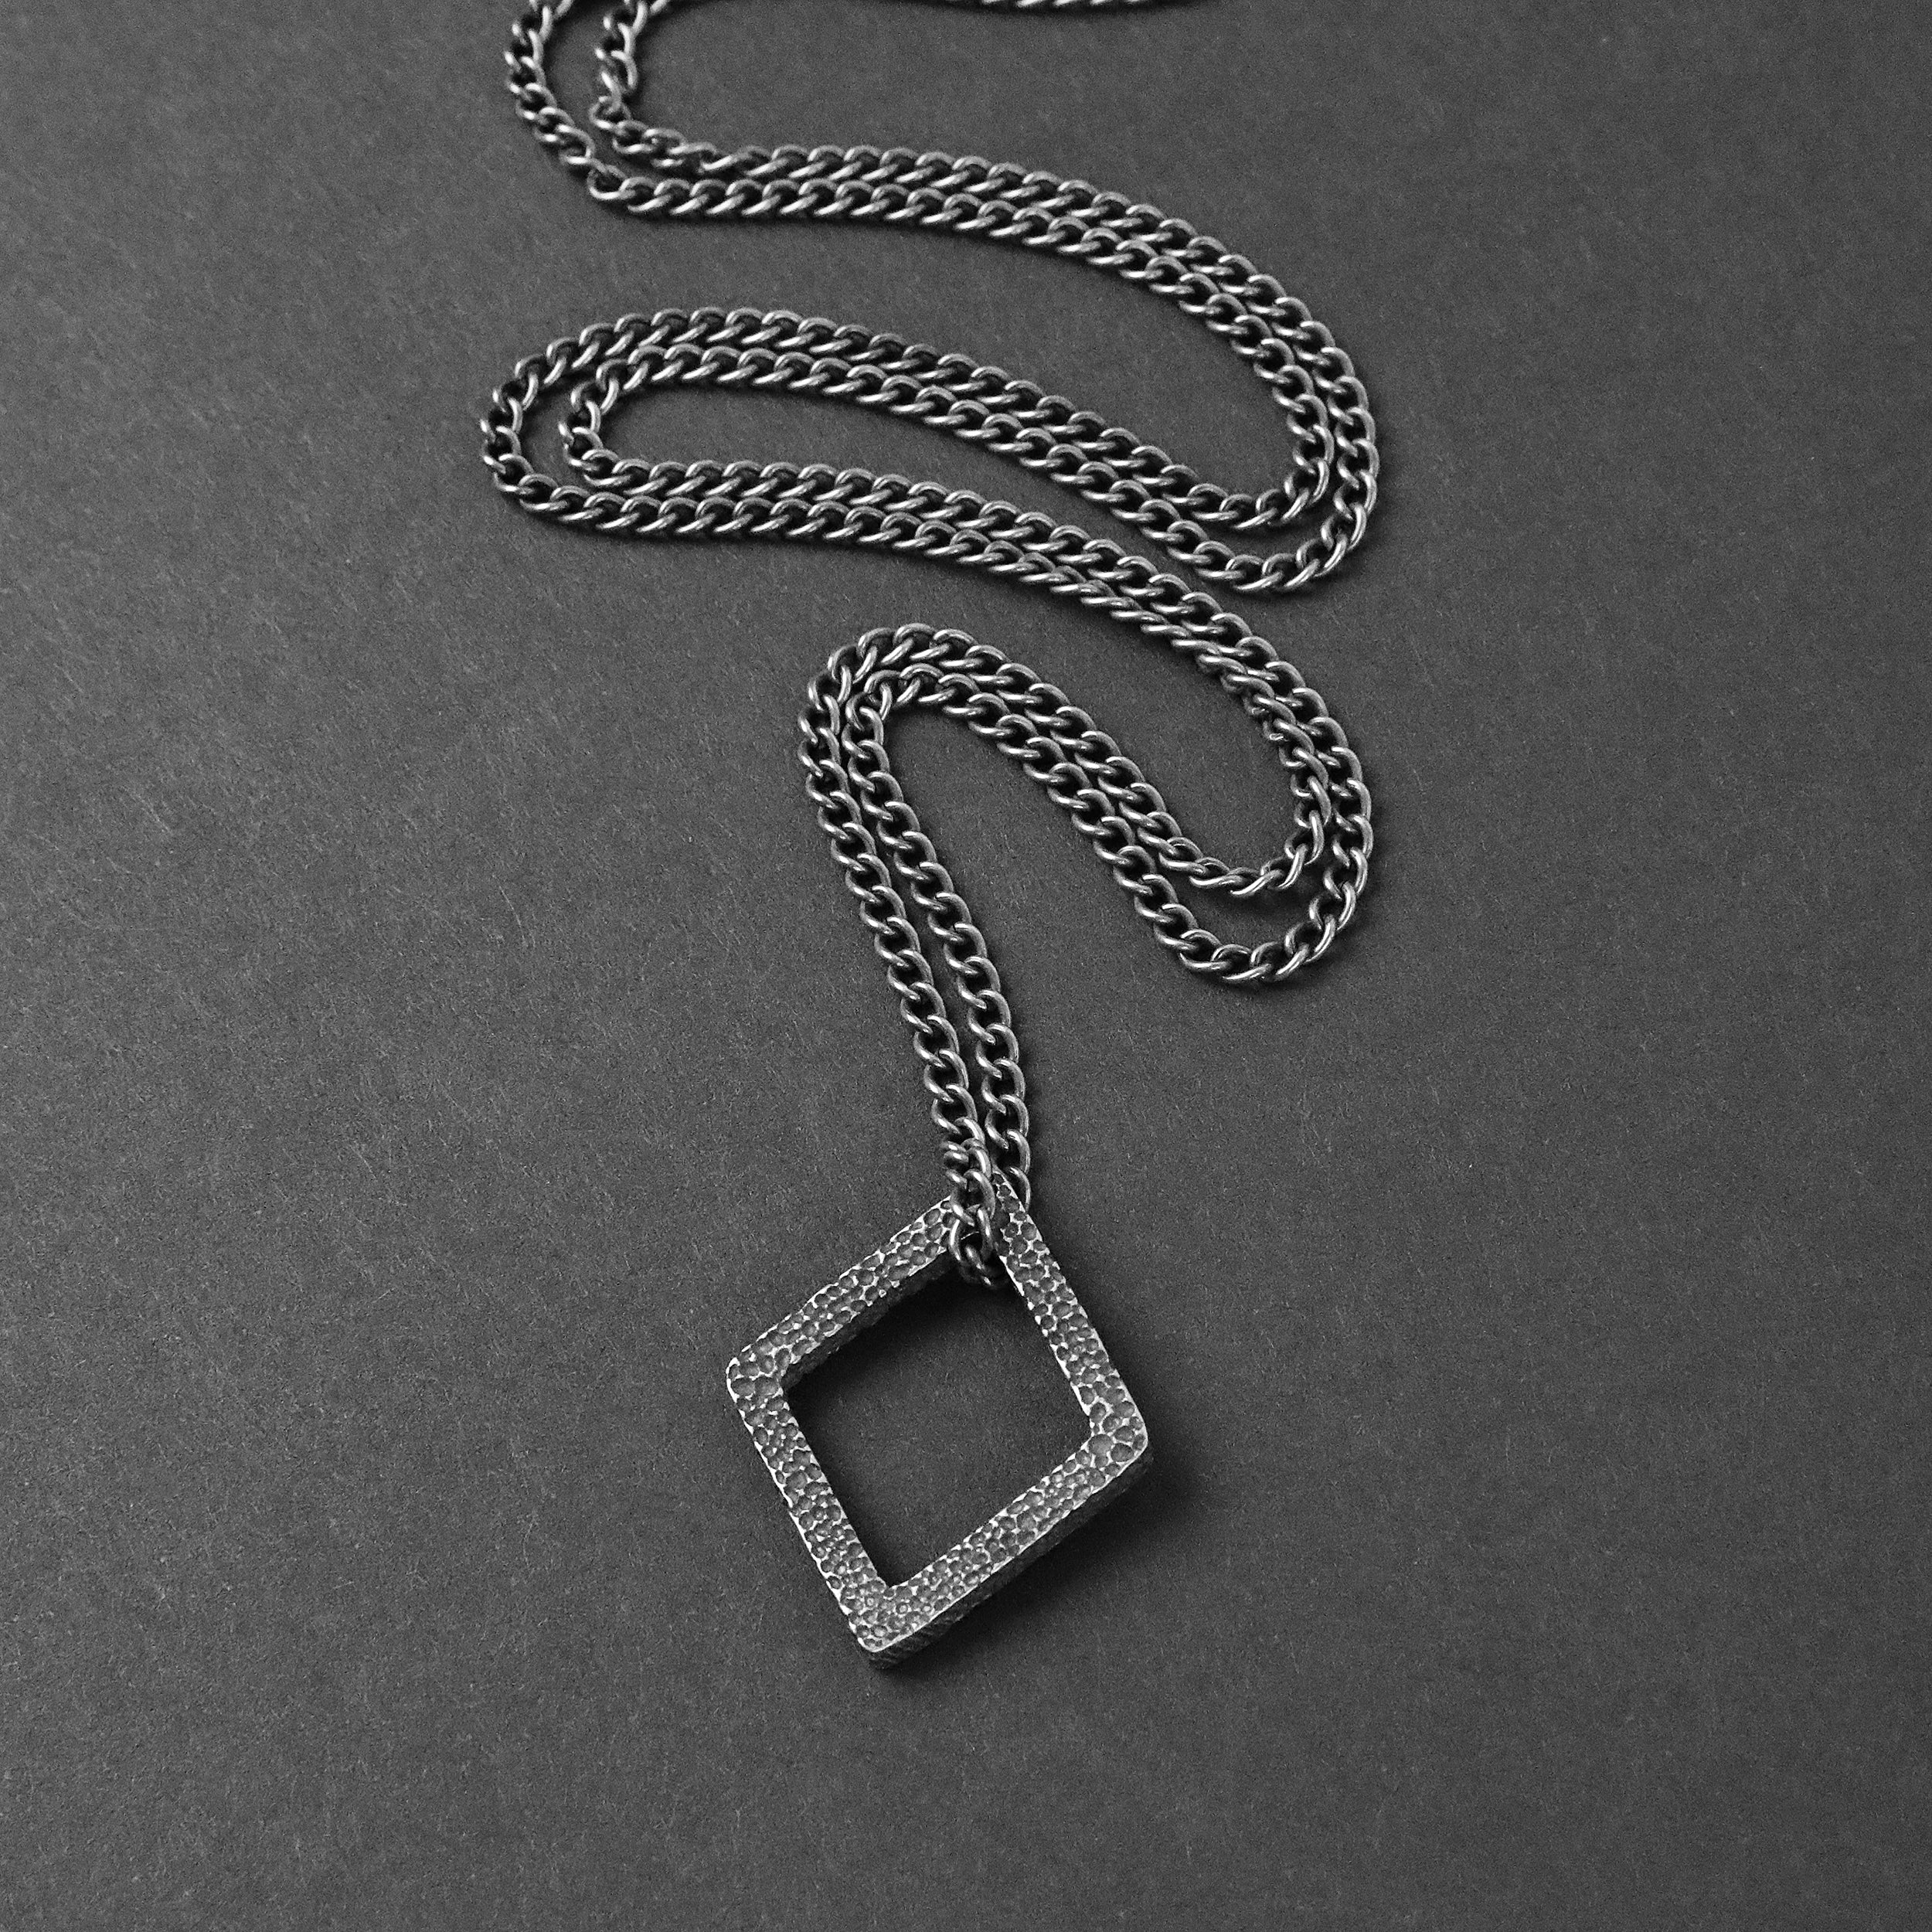 Geo Pendant Necklace - Aged Silver